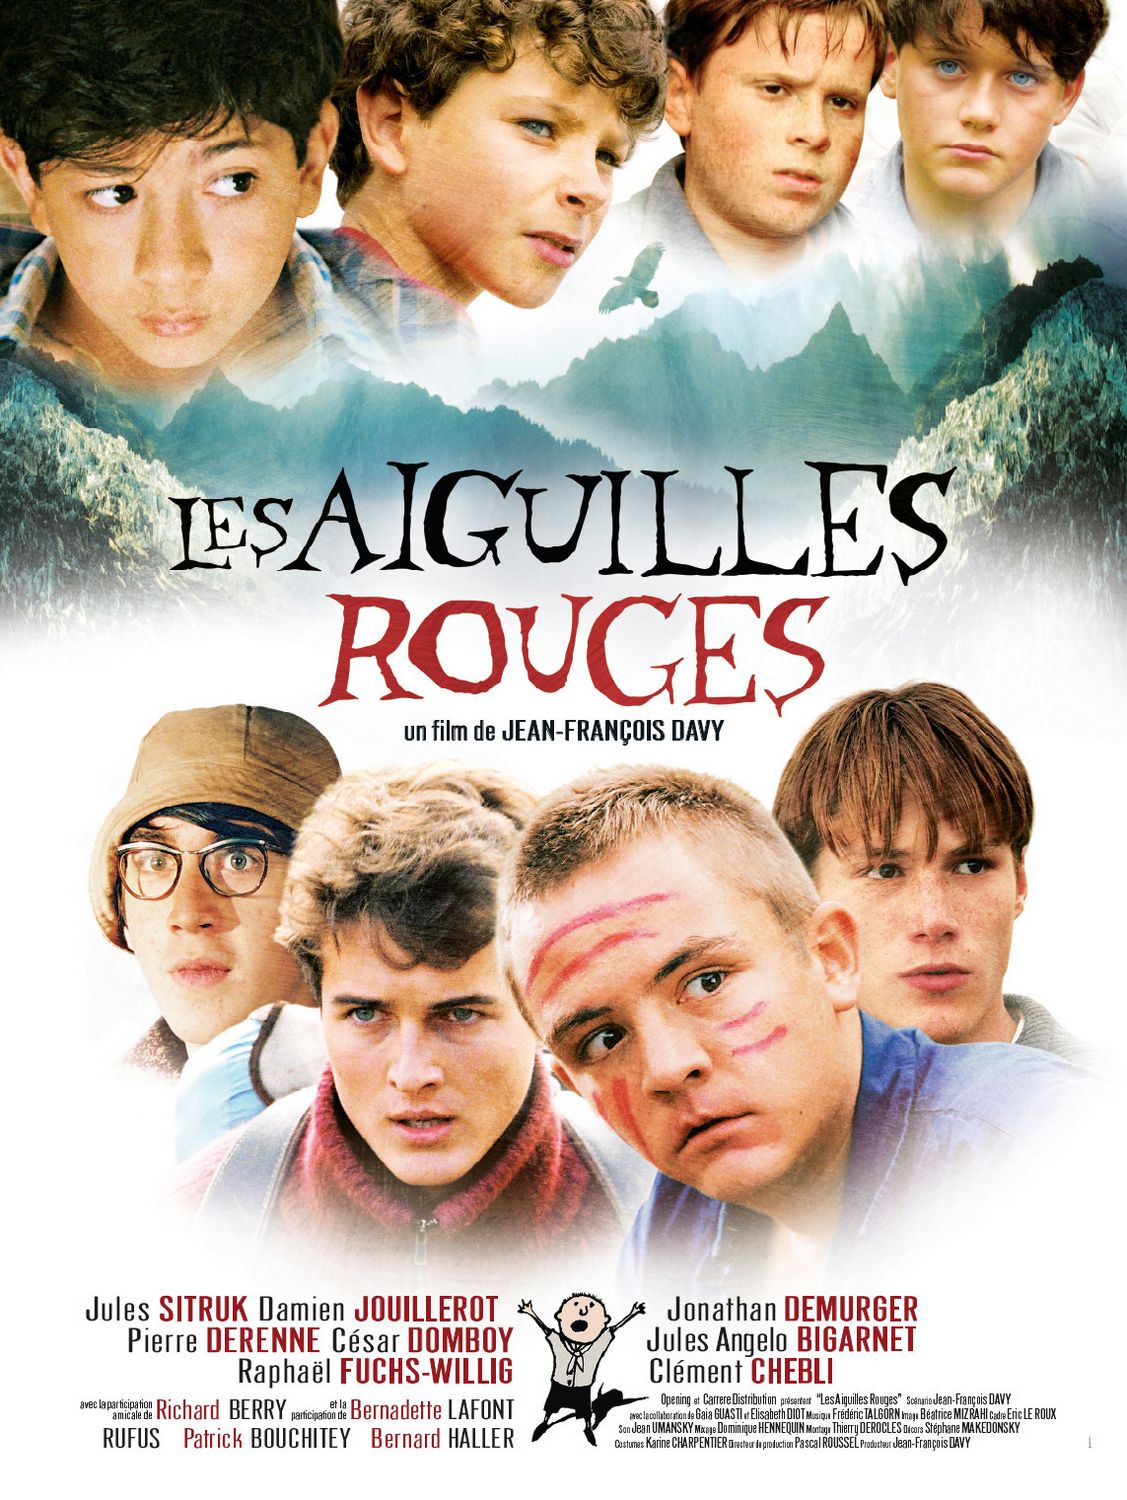 Extra Large Movie Poster Image for Aiguilles rouges, Les 